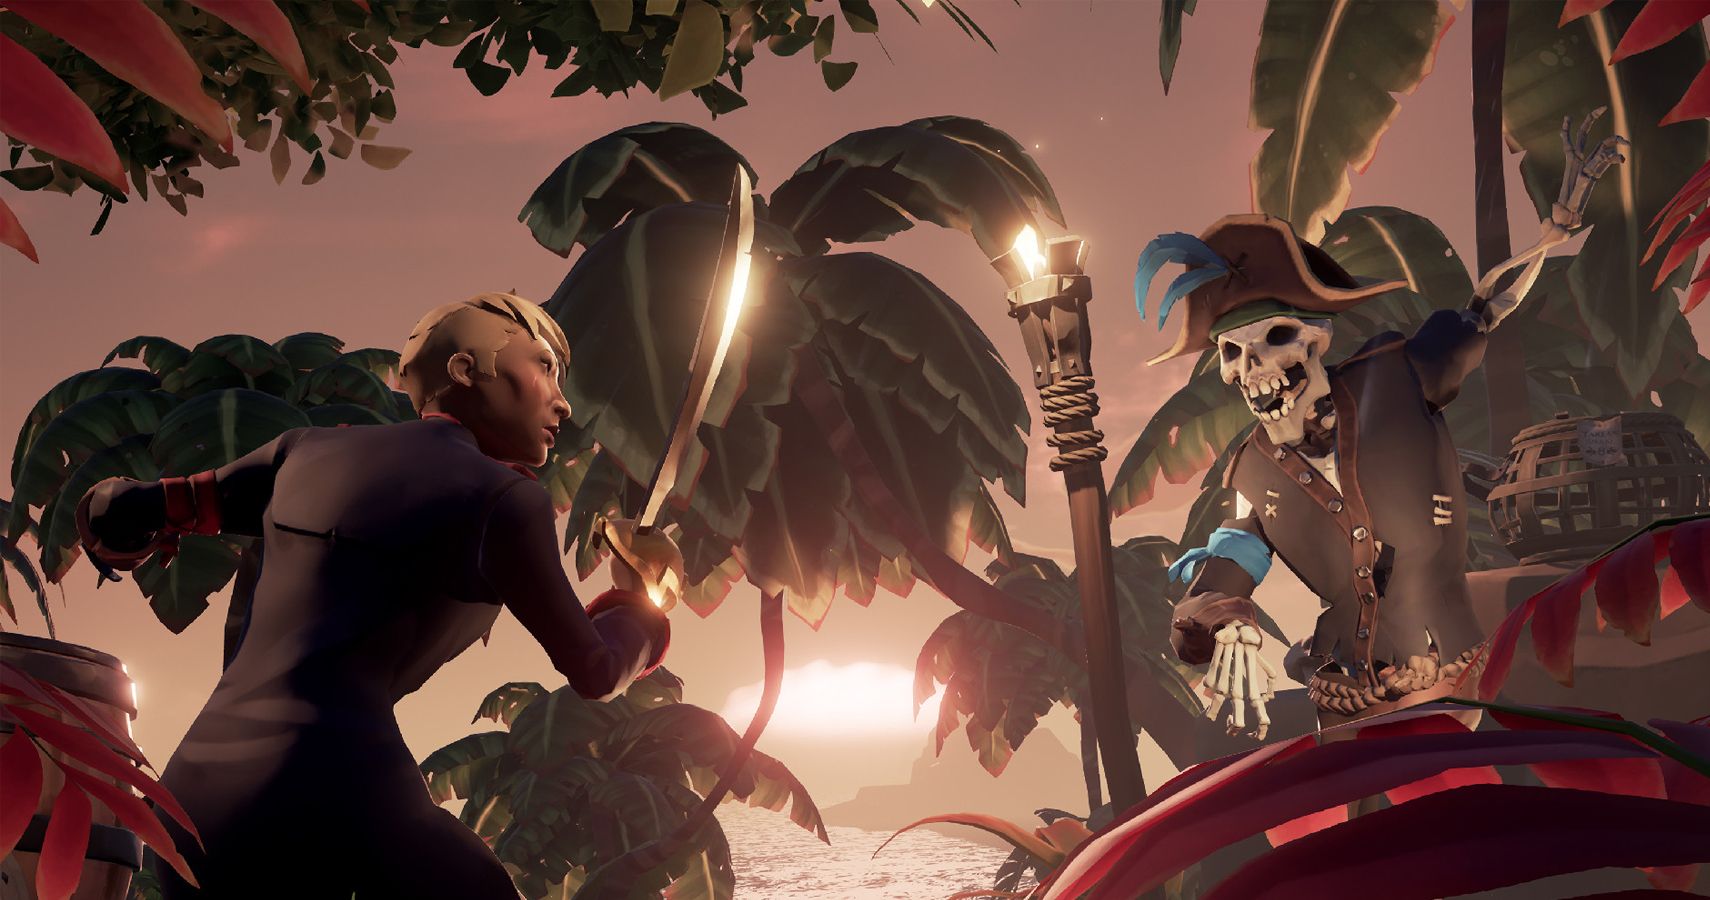 Sea of Thieves featuring a Pirate and Skeleton fighting